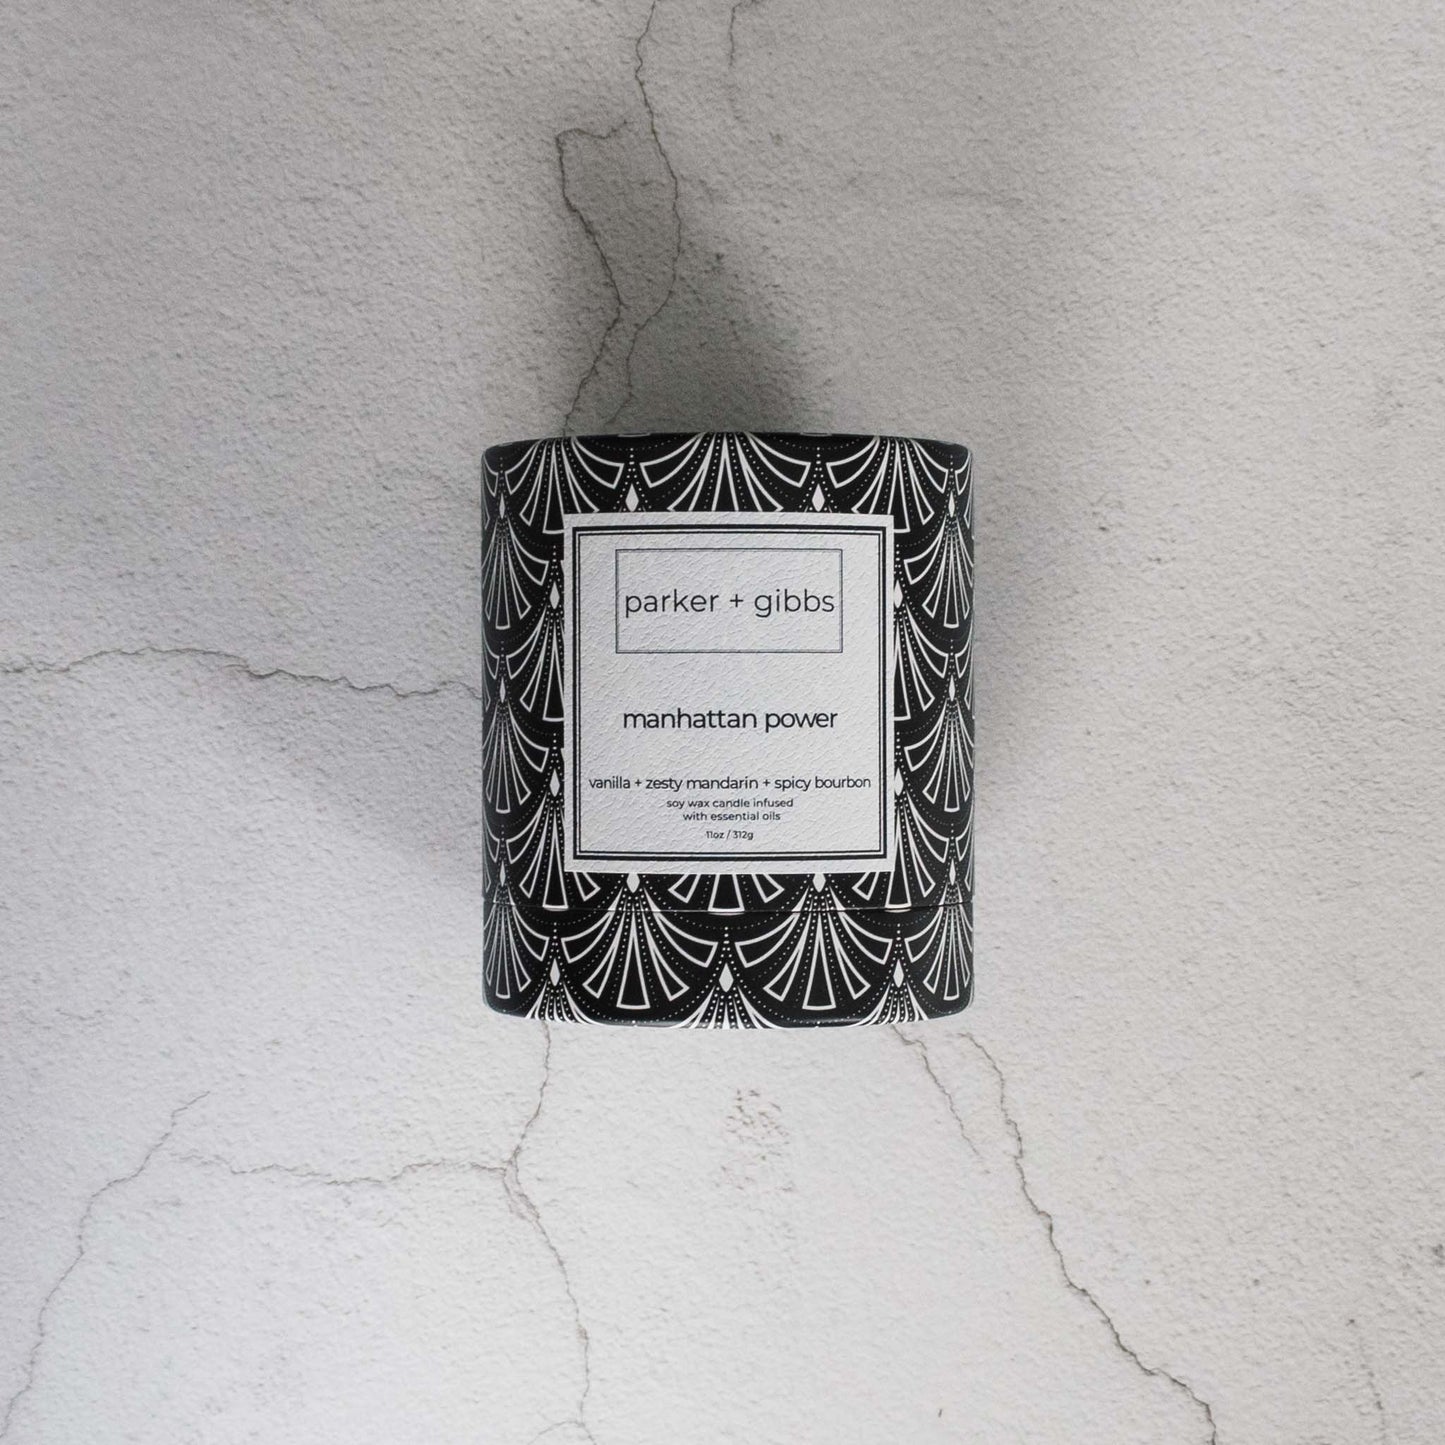 Luxury scented soy wax blend Manhattan Power candle box on limestone table.